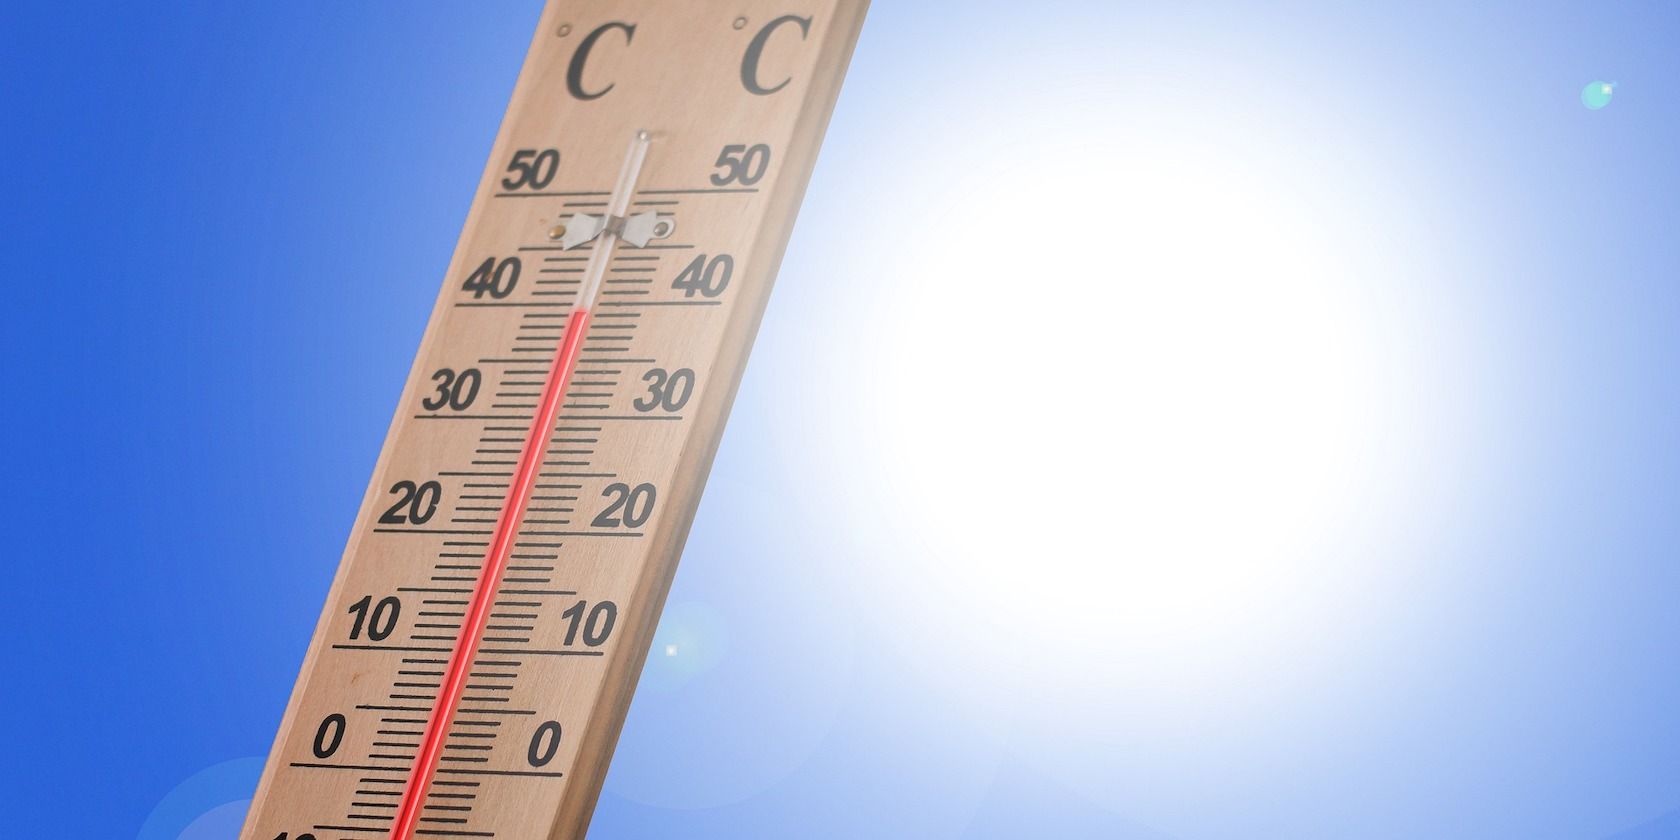 A thermometer showing 40 degrees Celsius